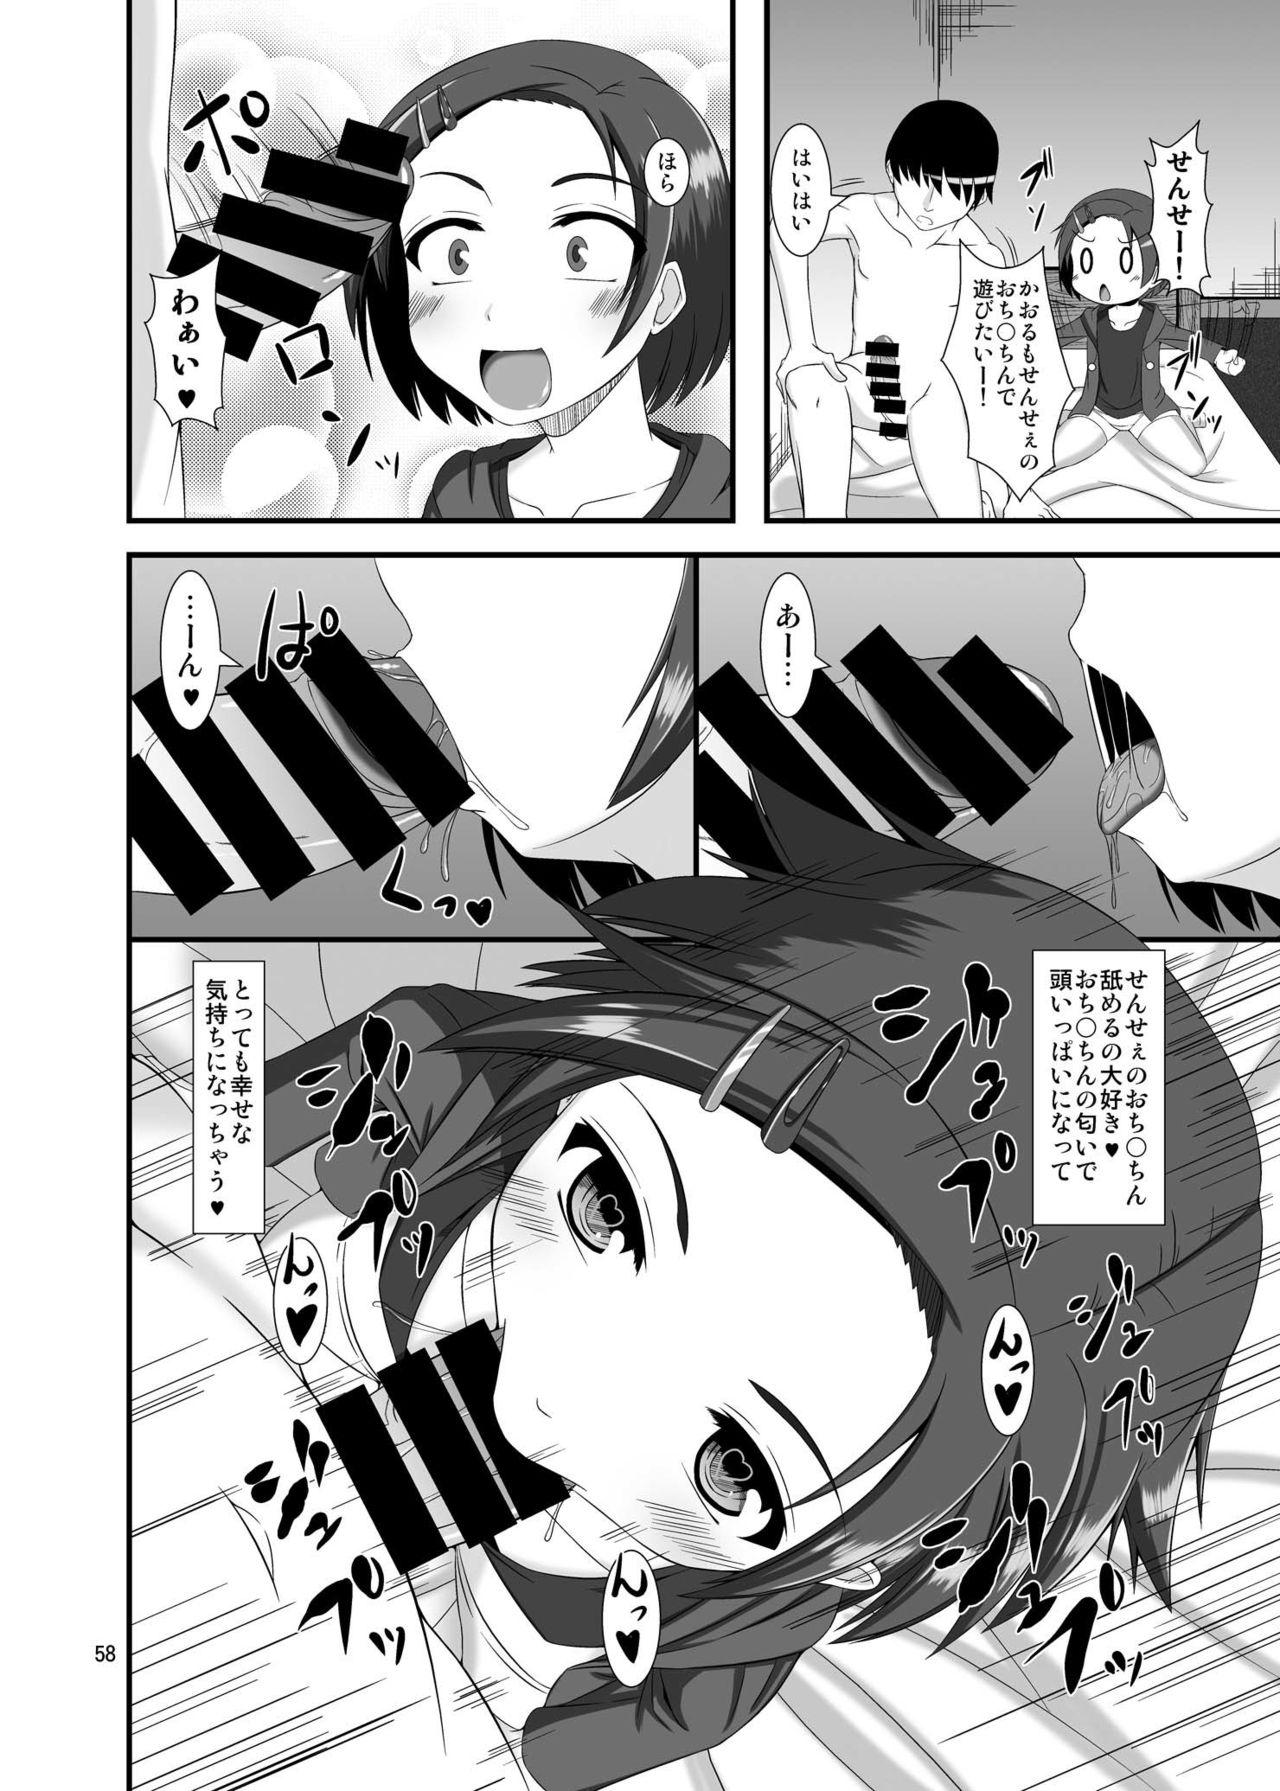 Shaking Mobam@s Do-M Hoihoi 4 - The idolmaster Sapphic Erotica - Page 9